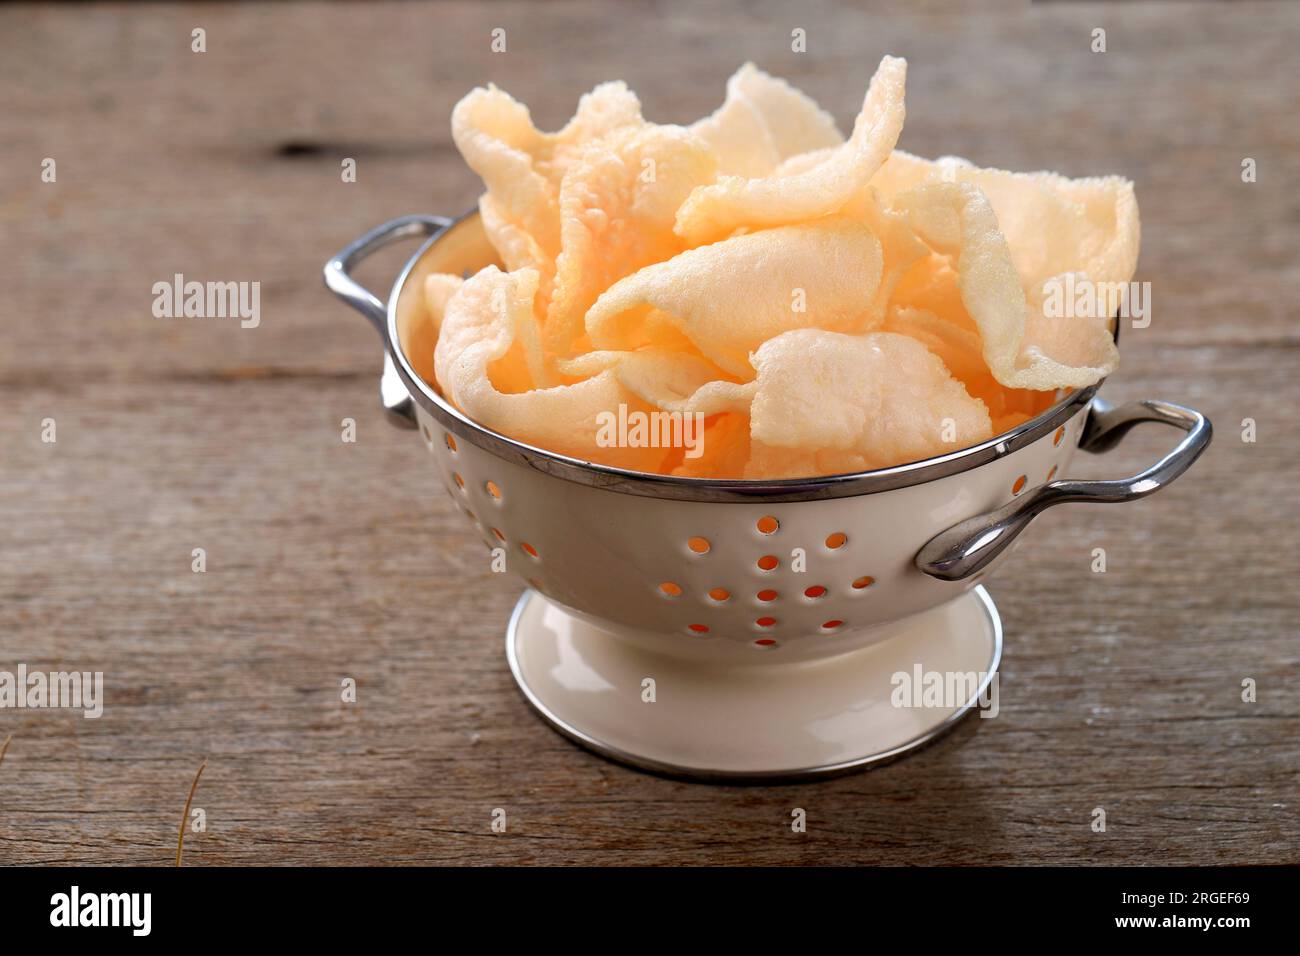 Kerupuk, Fried Crispy Crunchy Crackers Made from Flour and Spice. Popular Side Dish in Indonesian Menu. Stock Photo